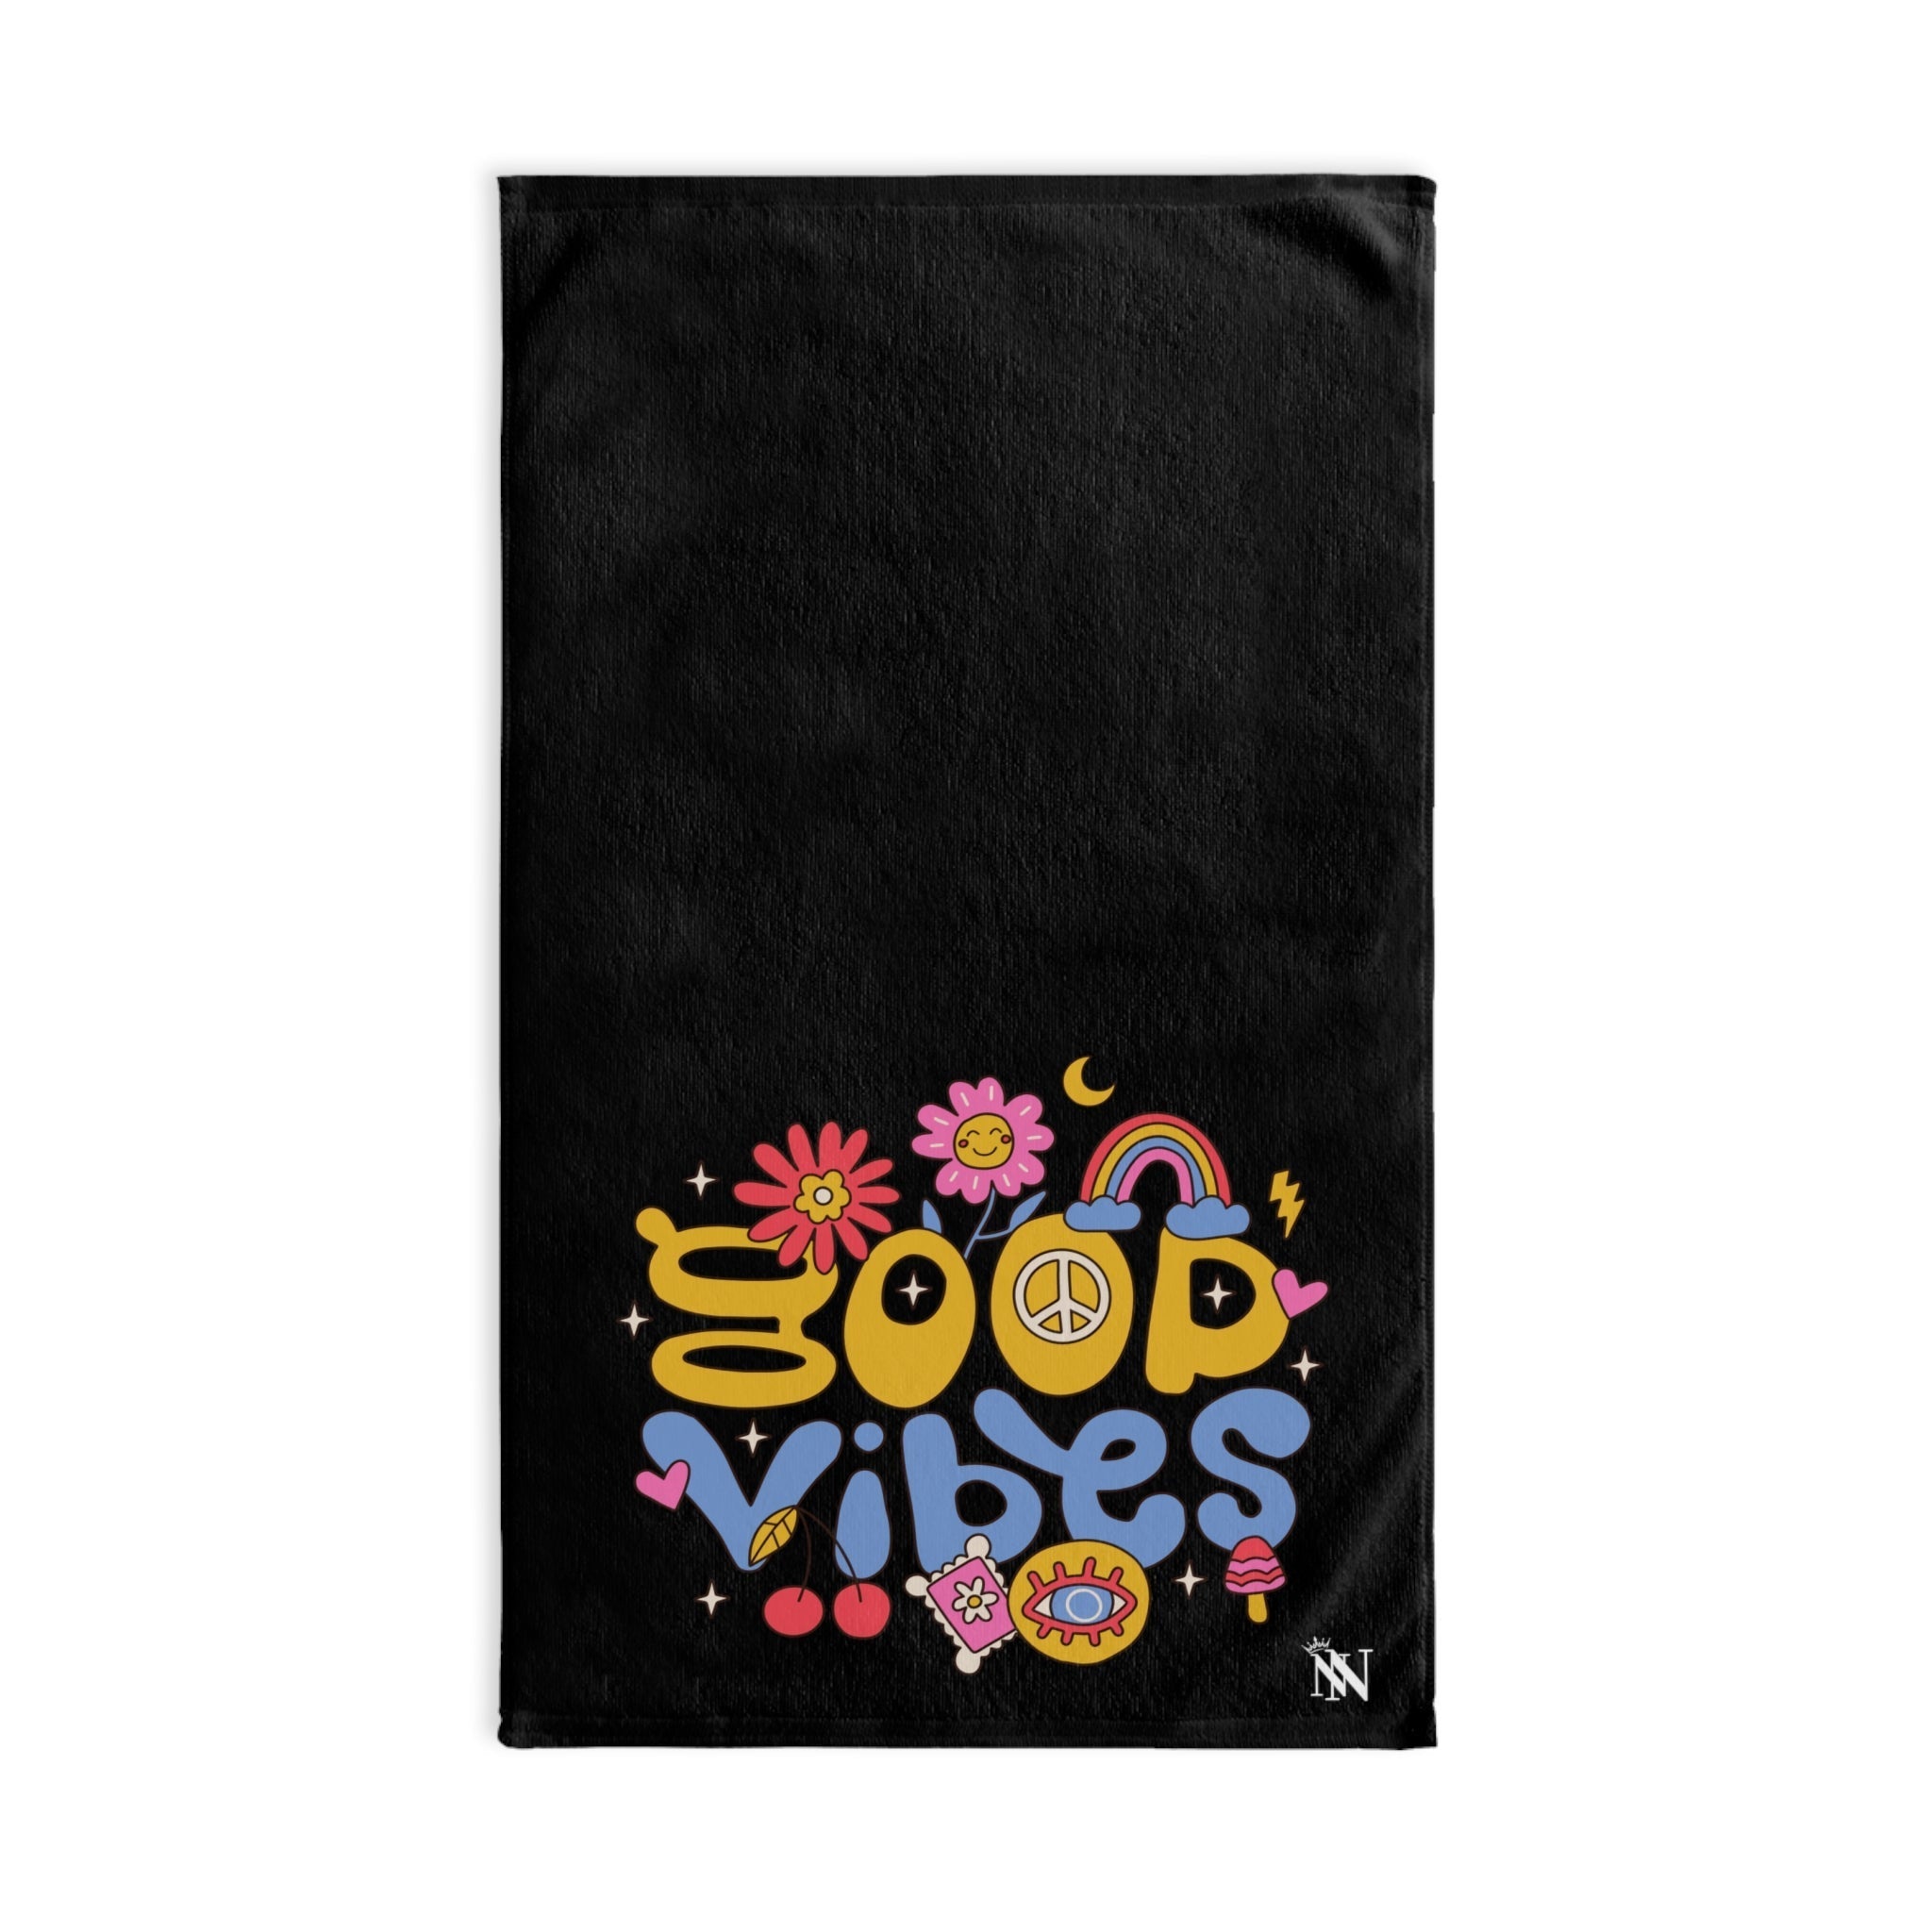 Hippie Vibes Good Black | Sexy Gifts for Boyfriend, Funny Towel Romantic Gift for Wedding Couple Fiance First Year 2nd Anniversary Valentines, Party Gag Gifts, Joke Humor Cloth for Husband Men BF NECTAR NAPKINS